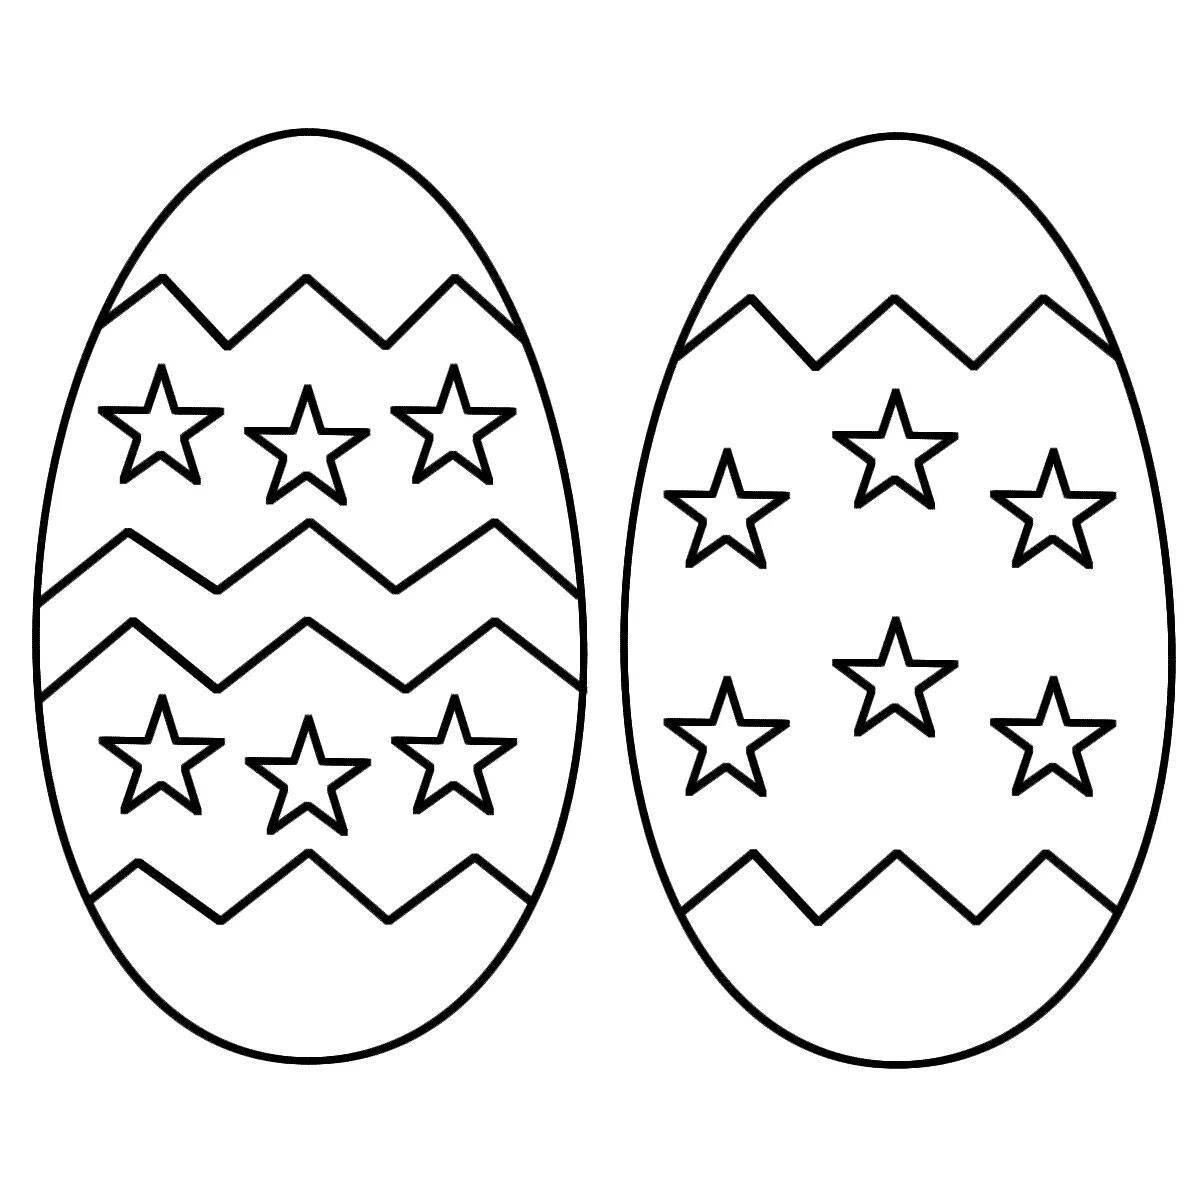 Glorious golden egg coloring page